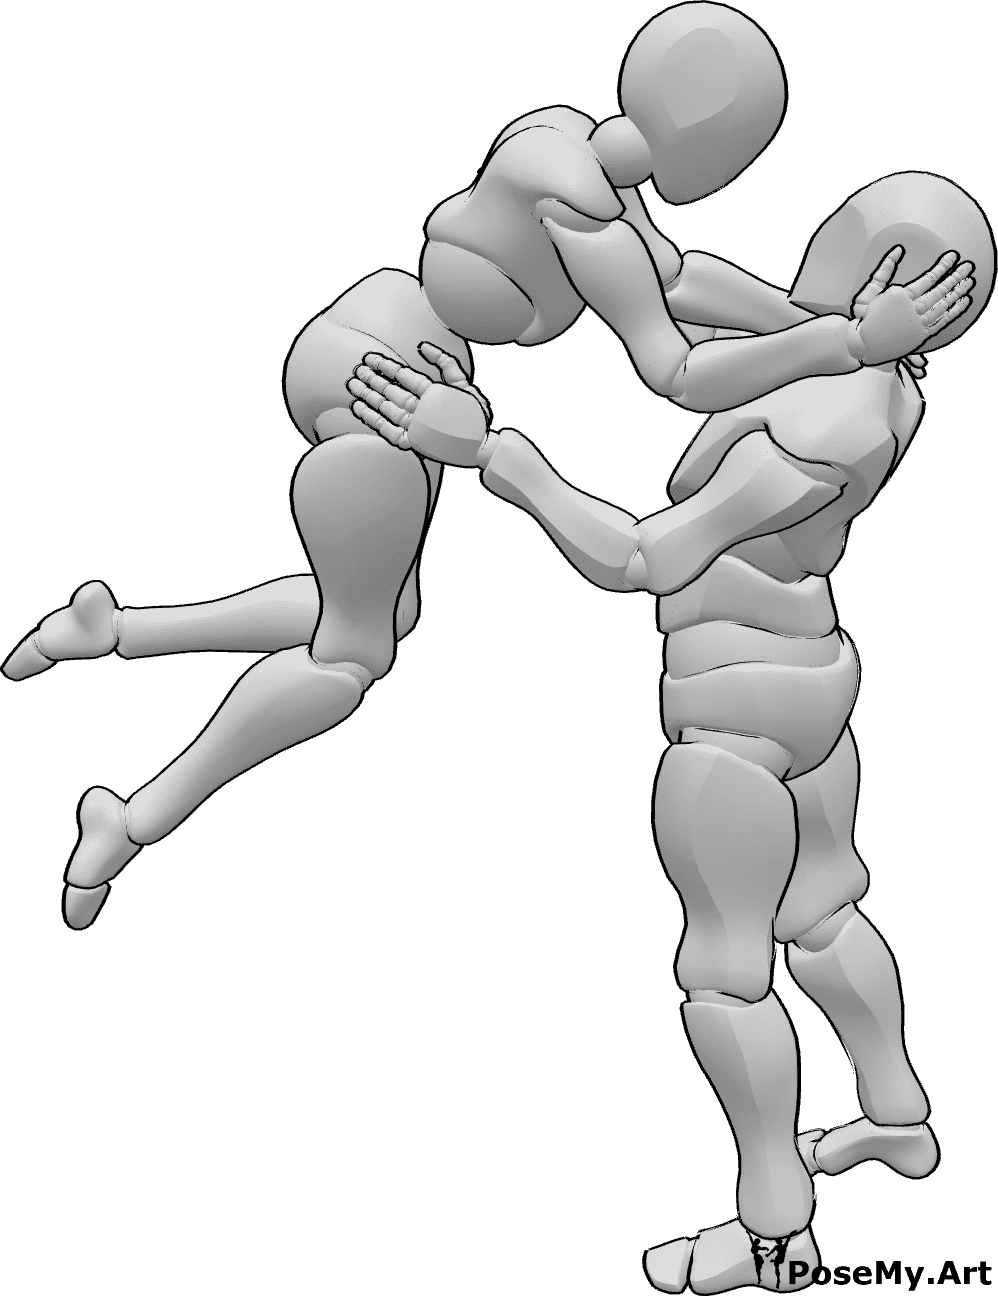 Pose Reference- man lifting woman in the air - man lifting woman in the air, woman puts her hand on man face